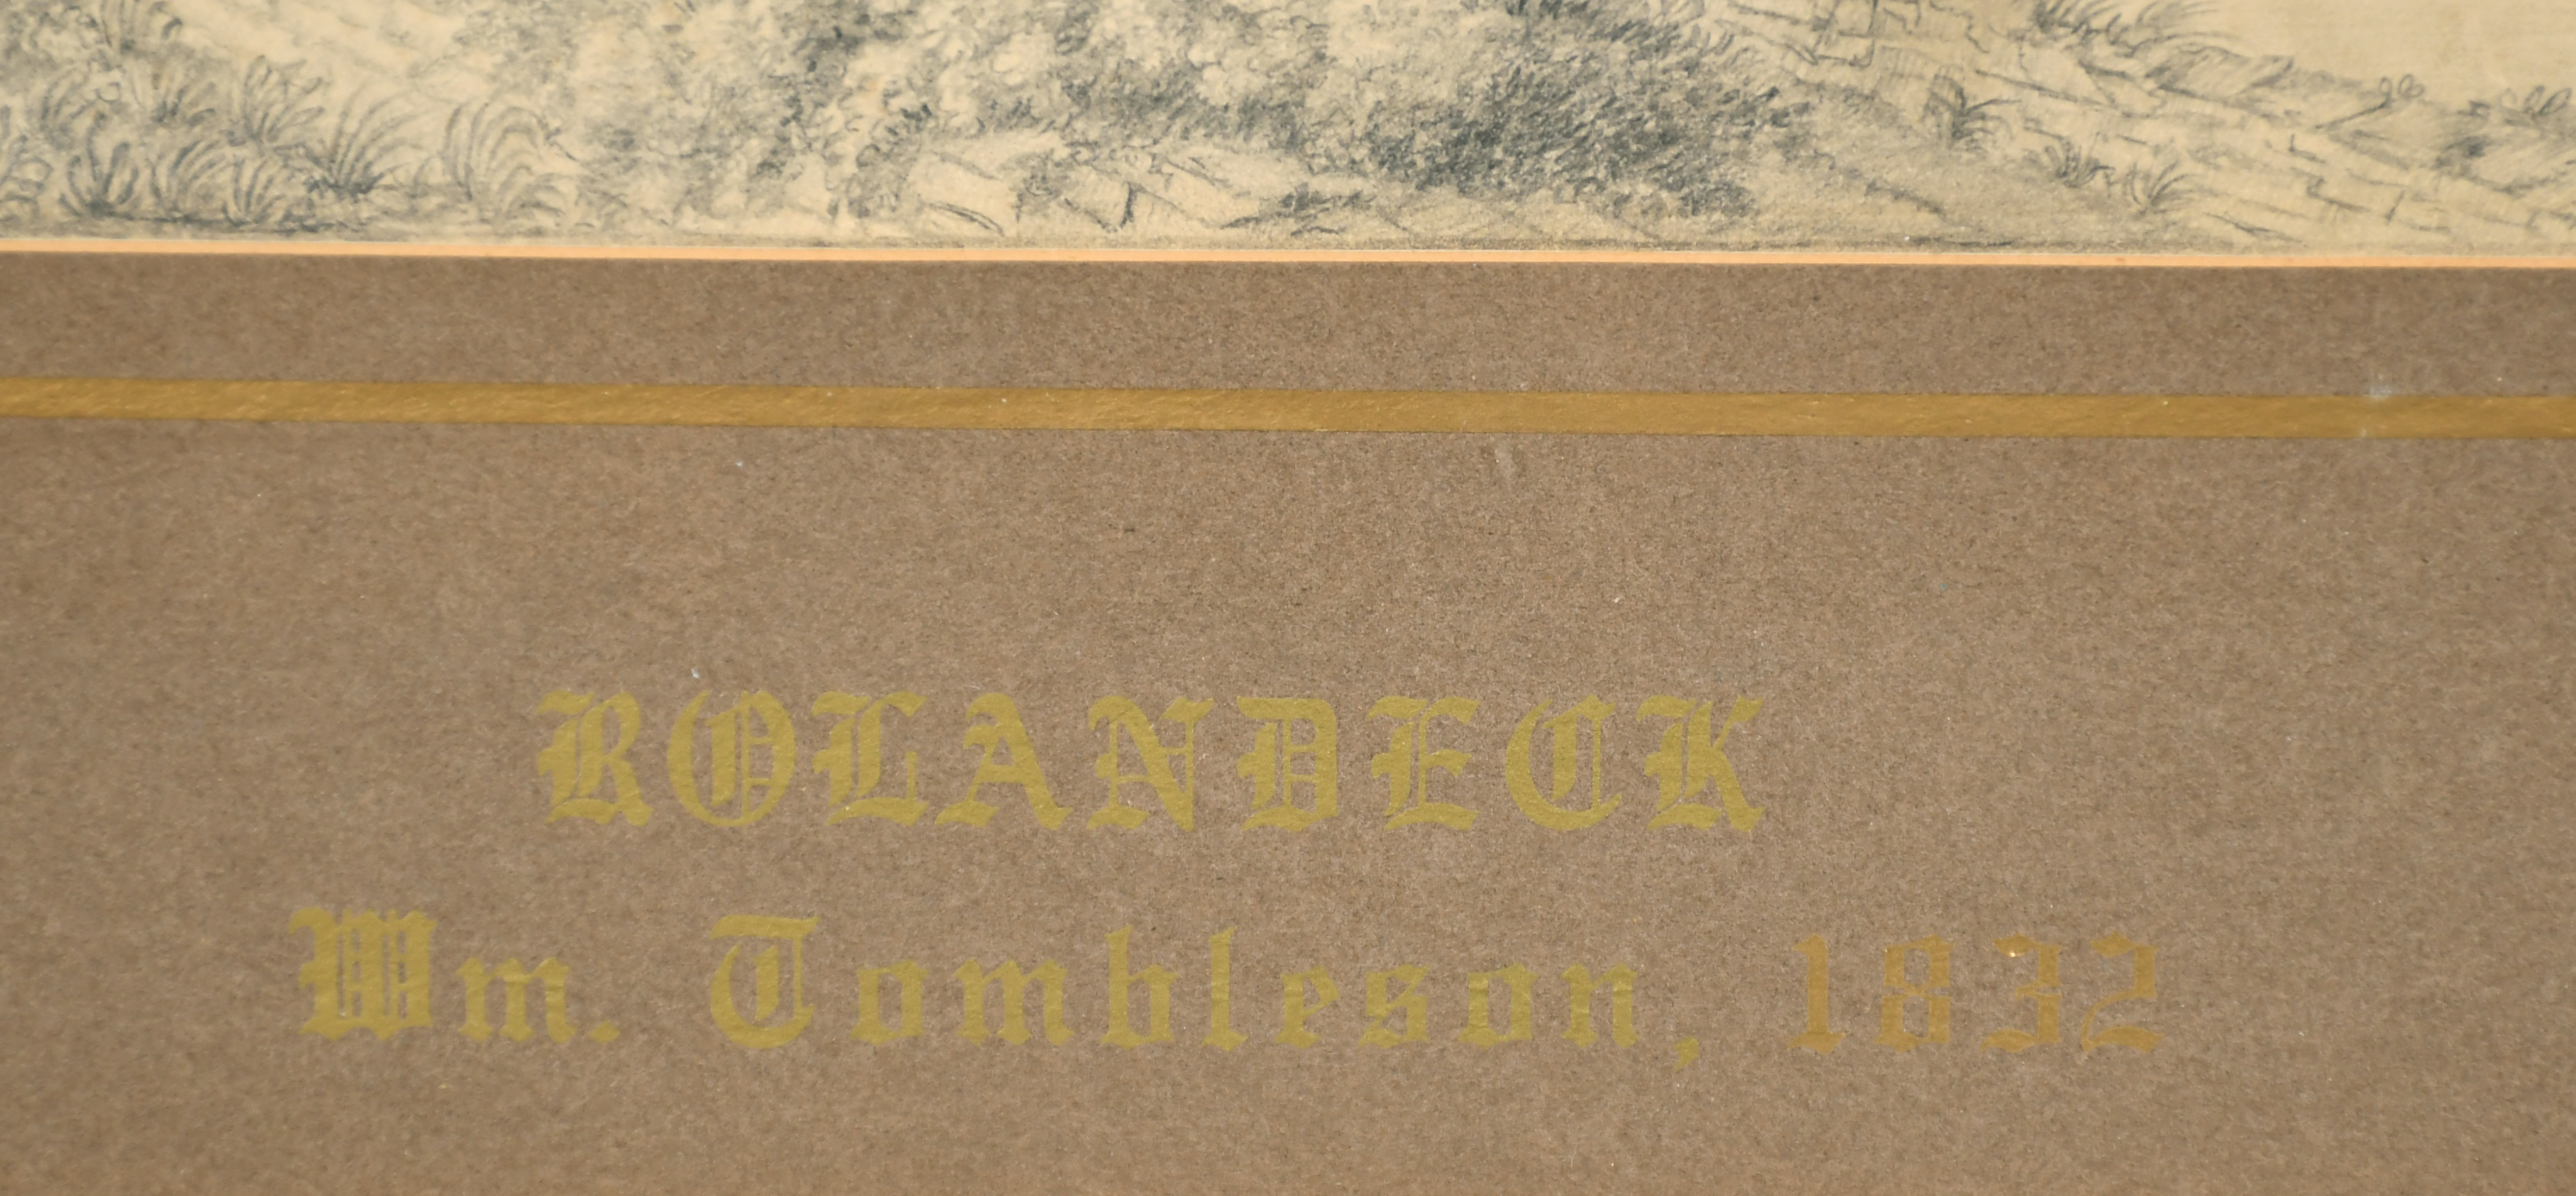 Attributed to William Tombleson (1795-1846) British. "Rolandeck", Pencil, Inscribed on the mount, - Image 3 of 5